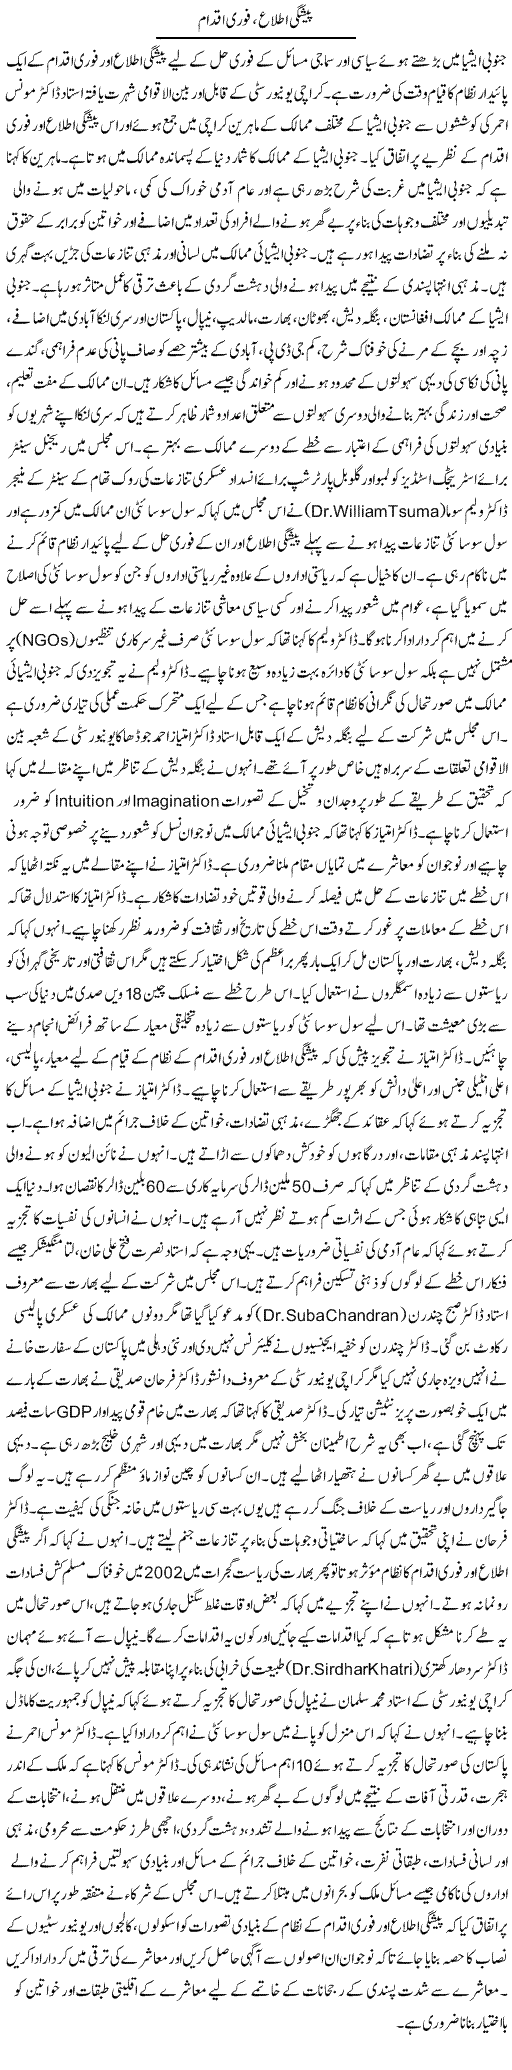 News in Advance Express Column Tauseef Ahmed 13 October 2010